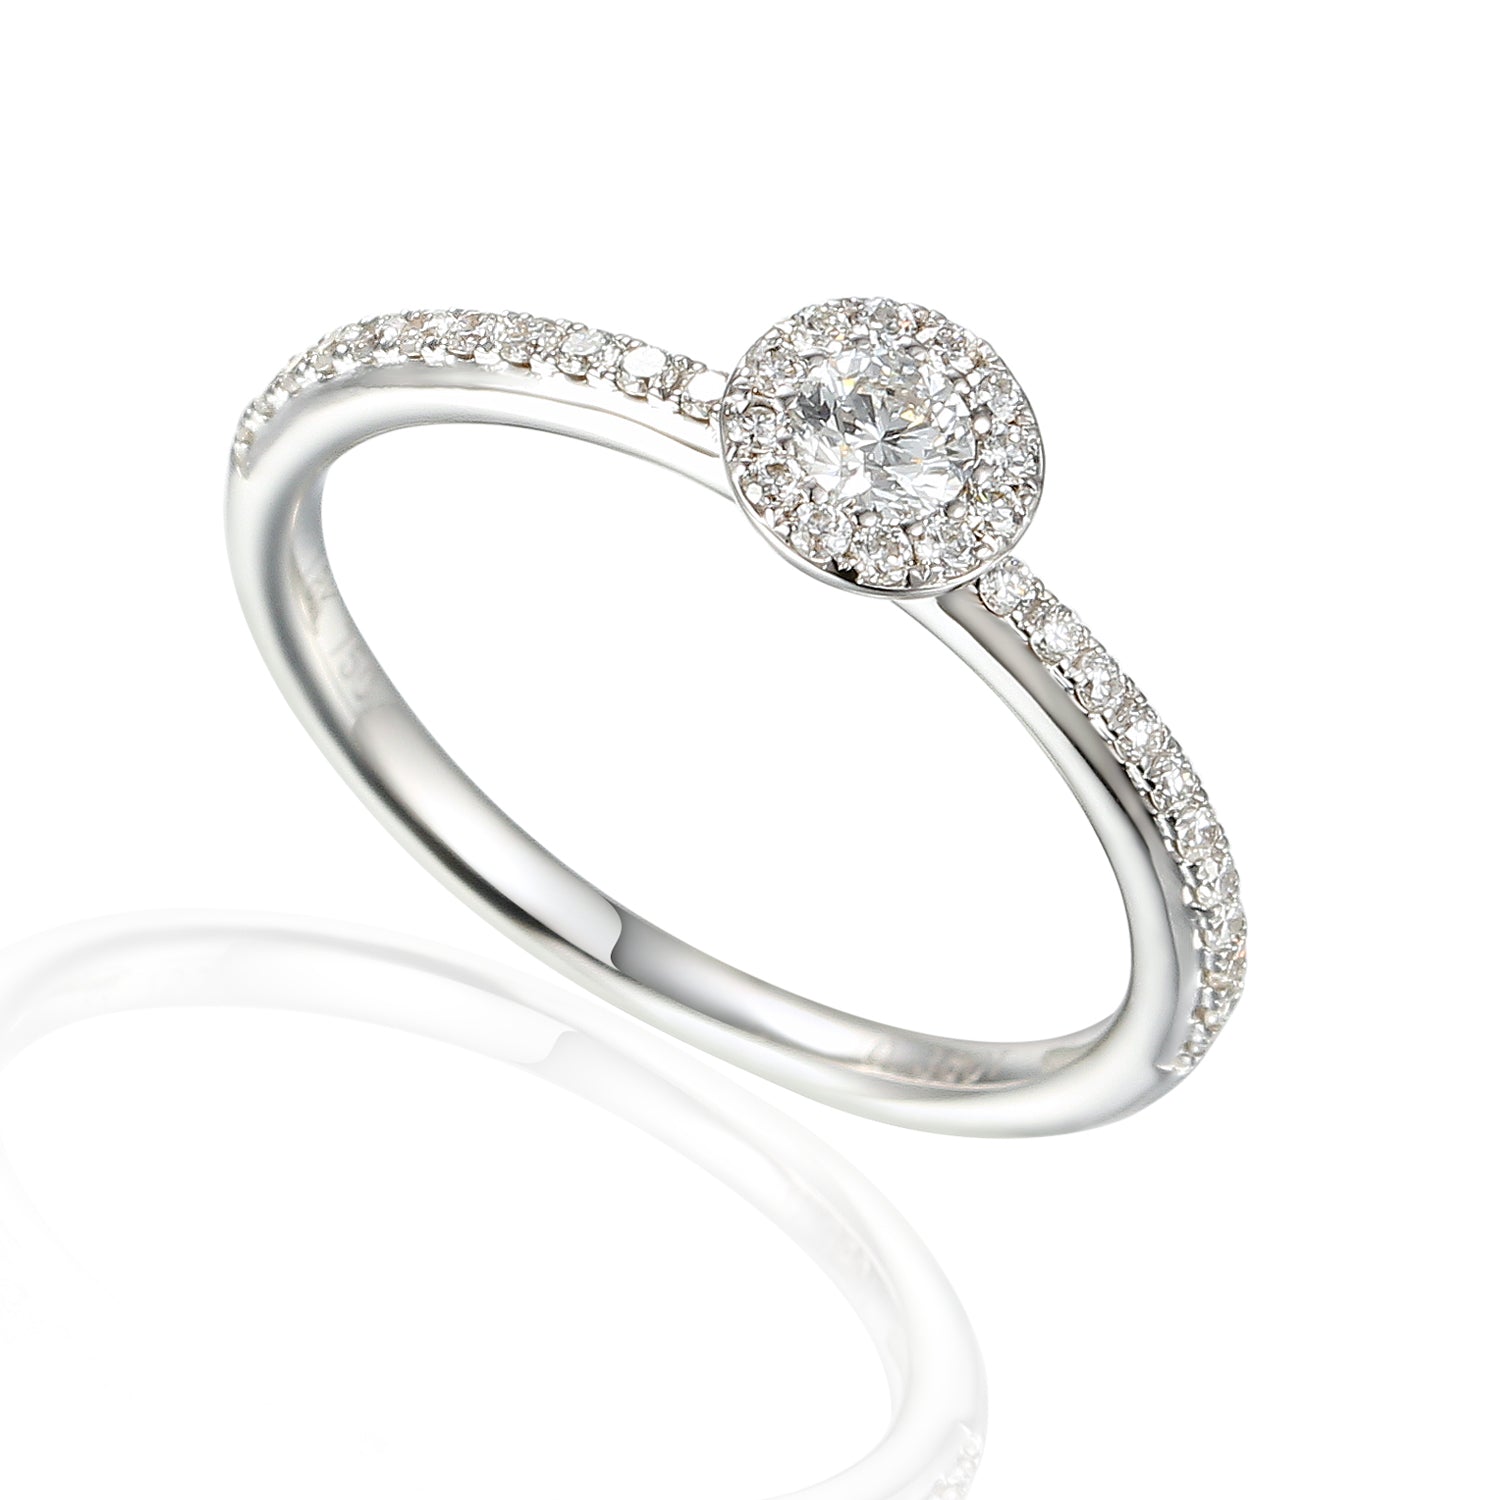 18ct White Gold Small Diamond Cluster Ring with Diamond shoulders